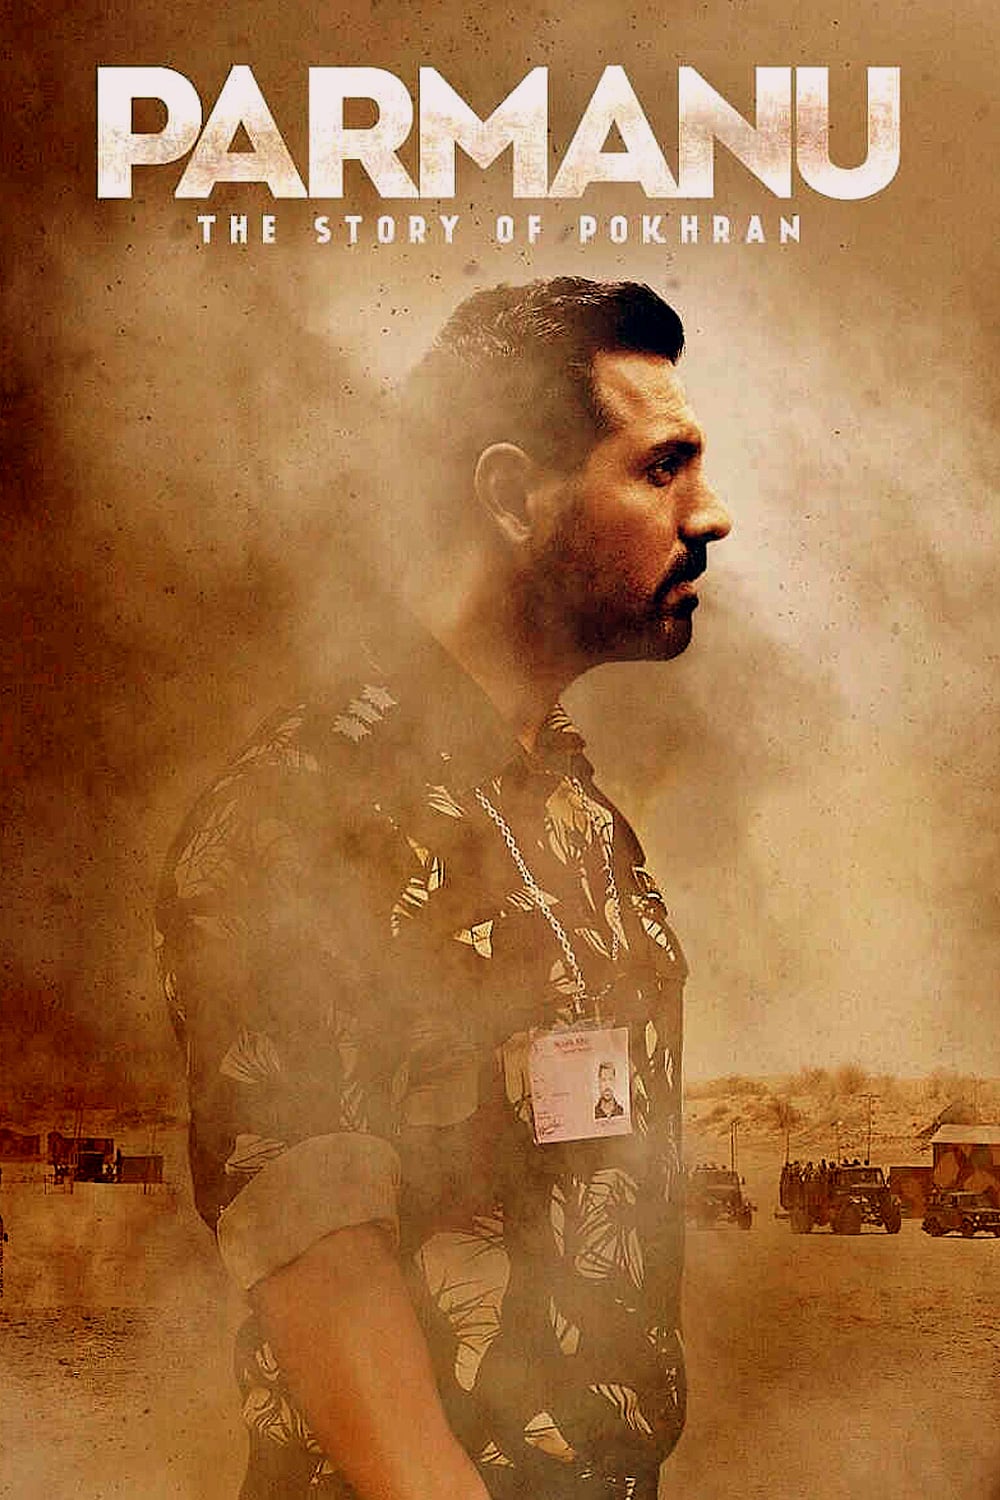 Poster for the movie "Parmanu: The Story of Pokhran"